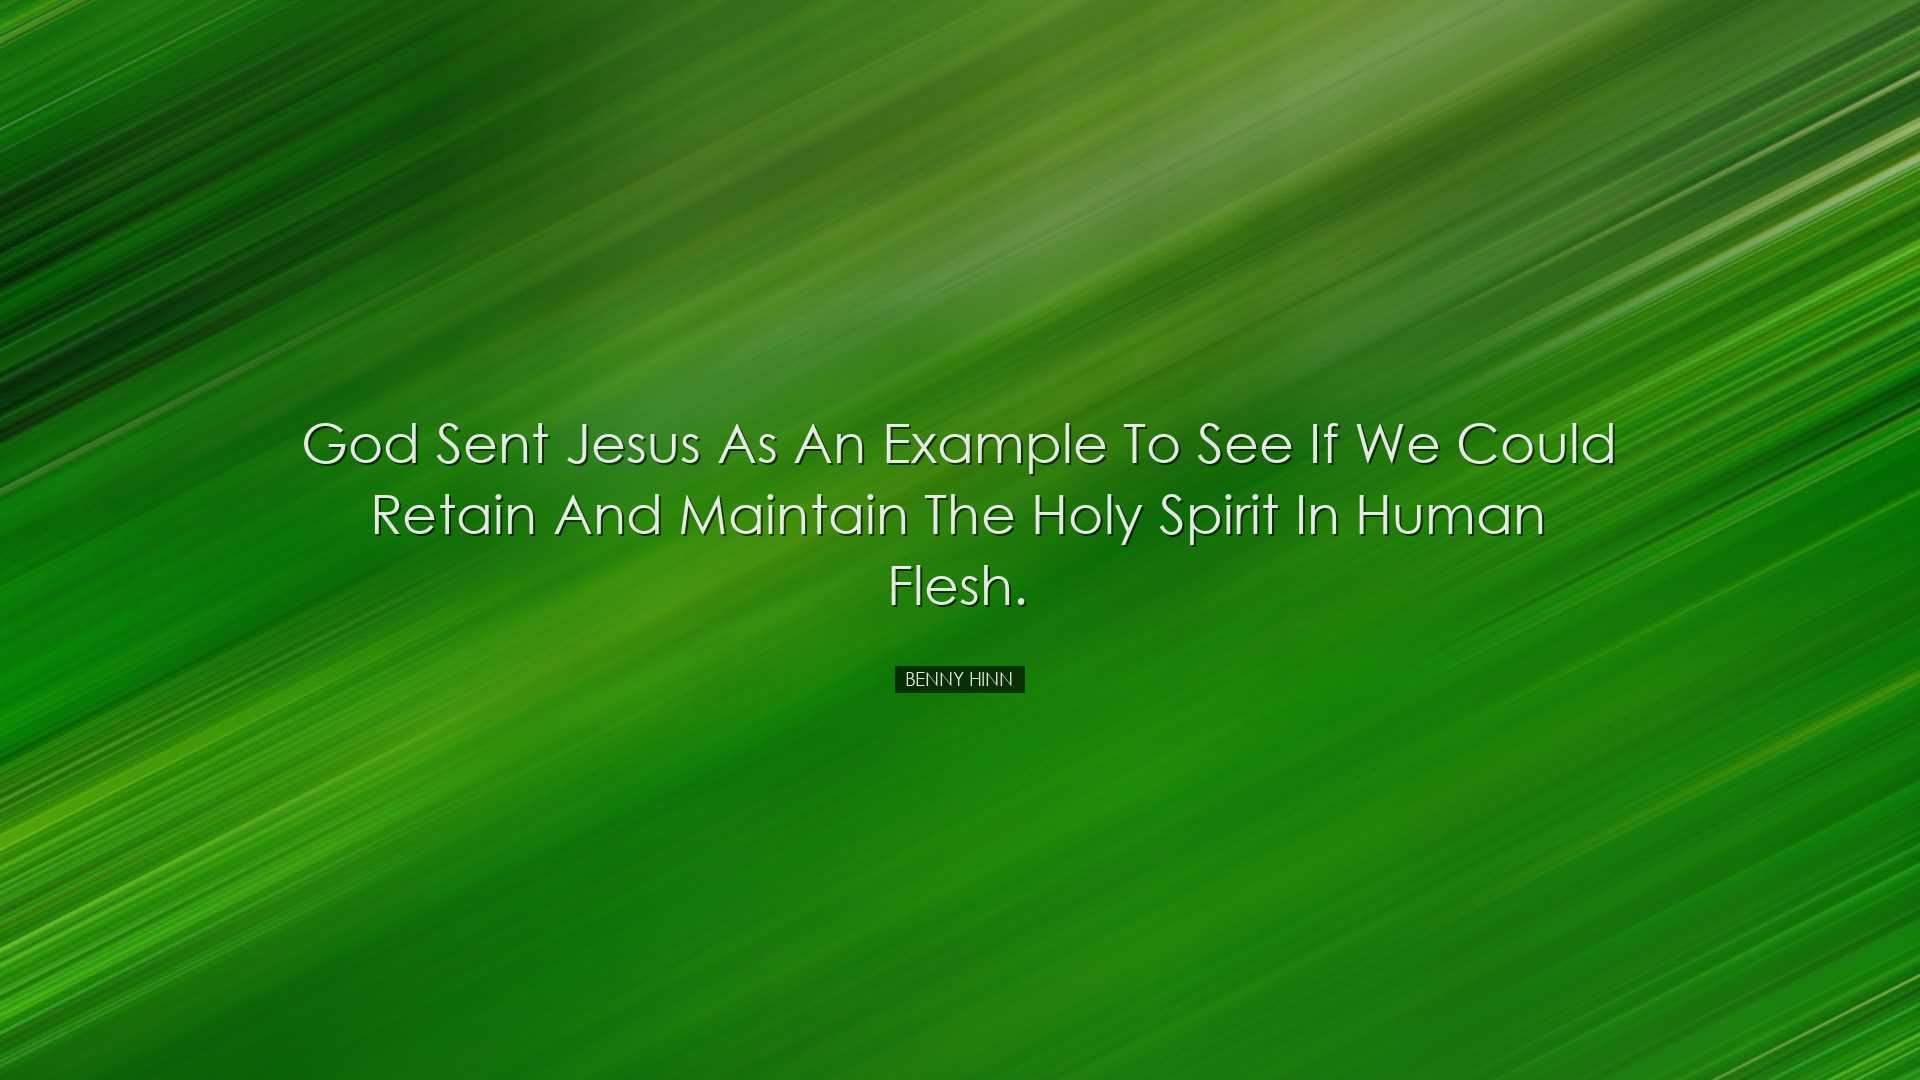 God sent Jesus as an example to see if we could retain and maintai